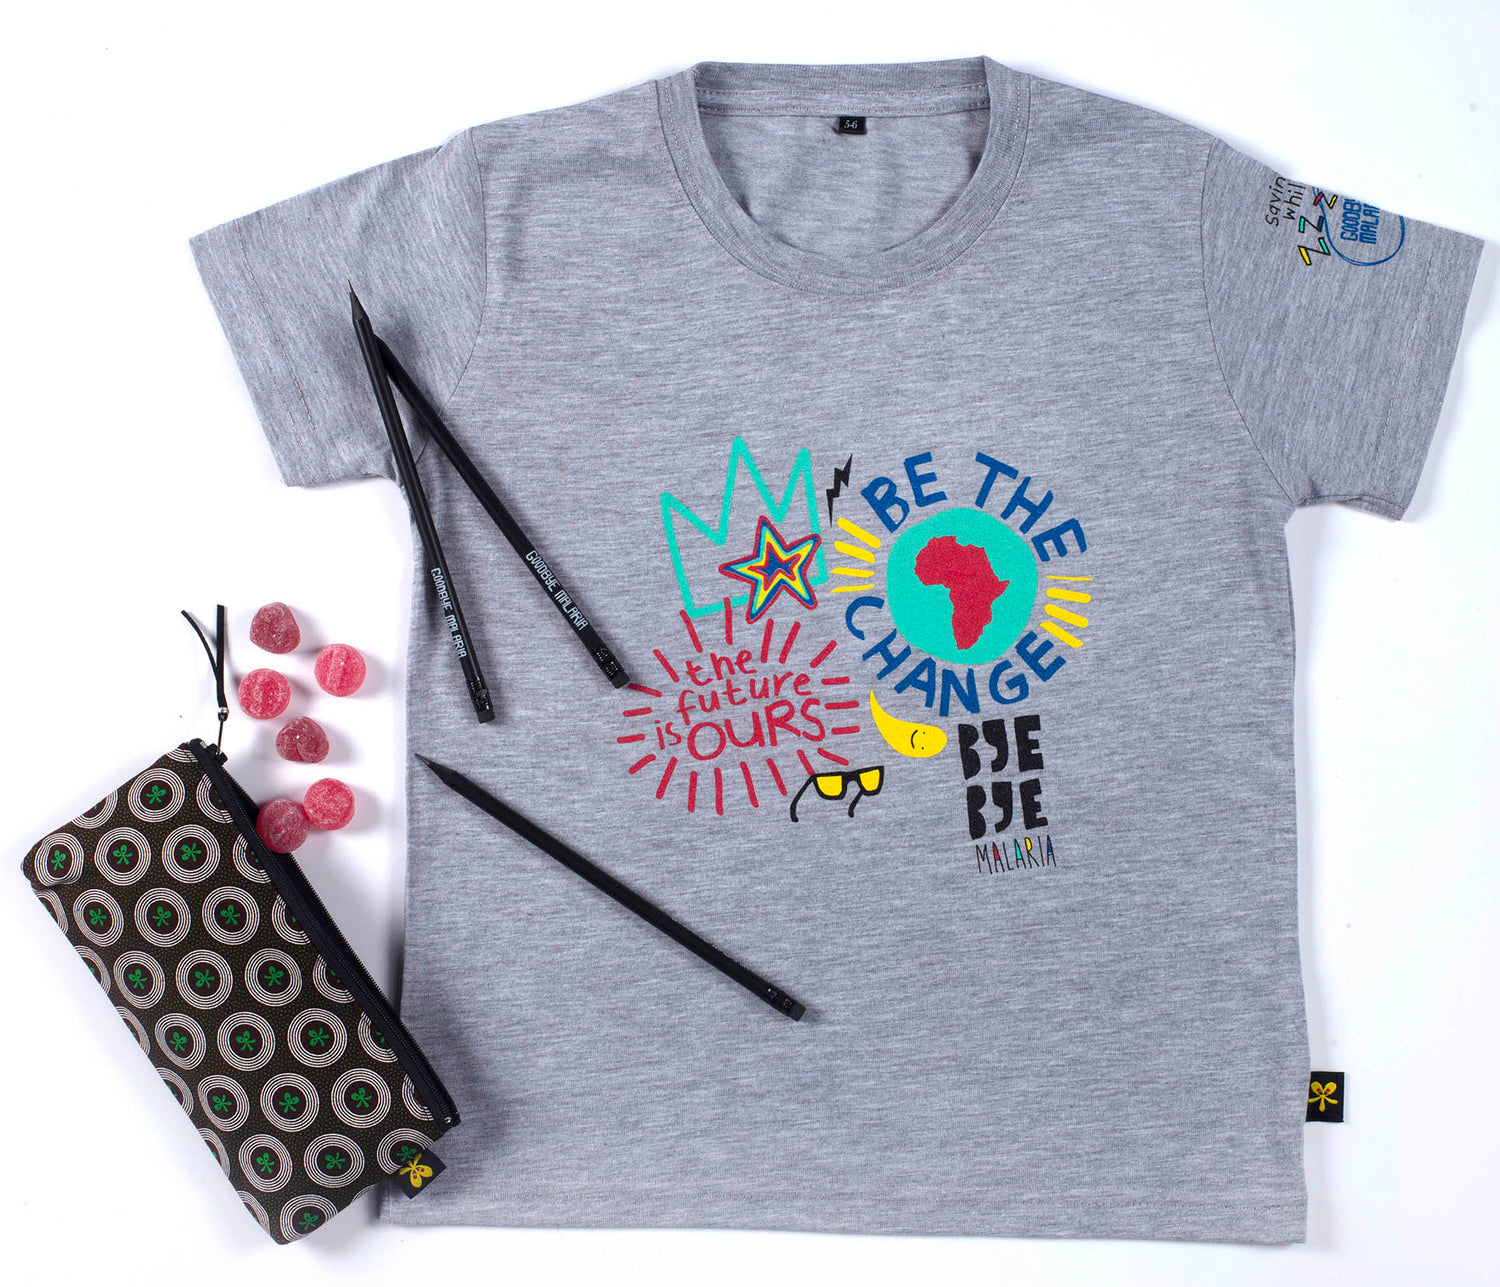 Kiddies T-shirt "Be the Change" Gift Idea with Shweshwe Pencil Case.